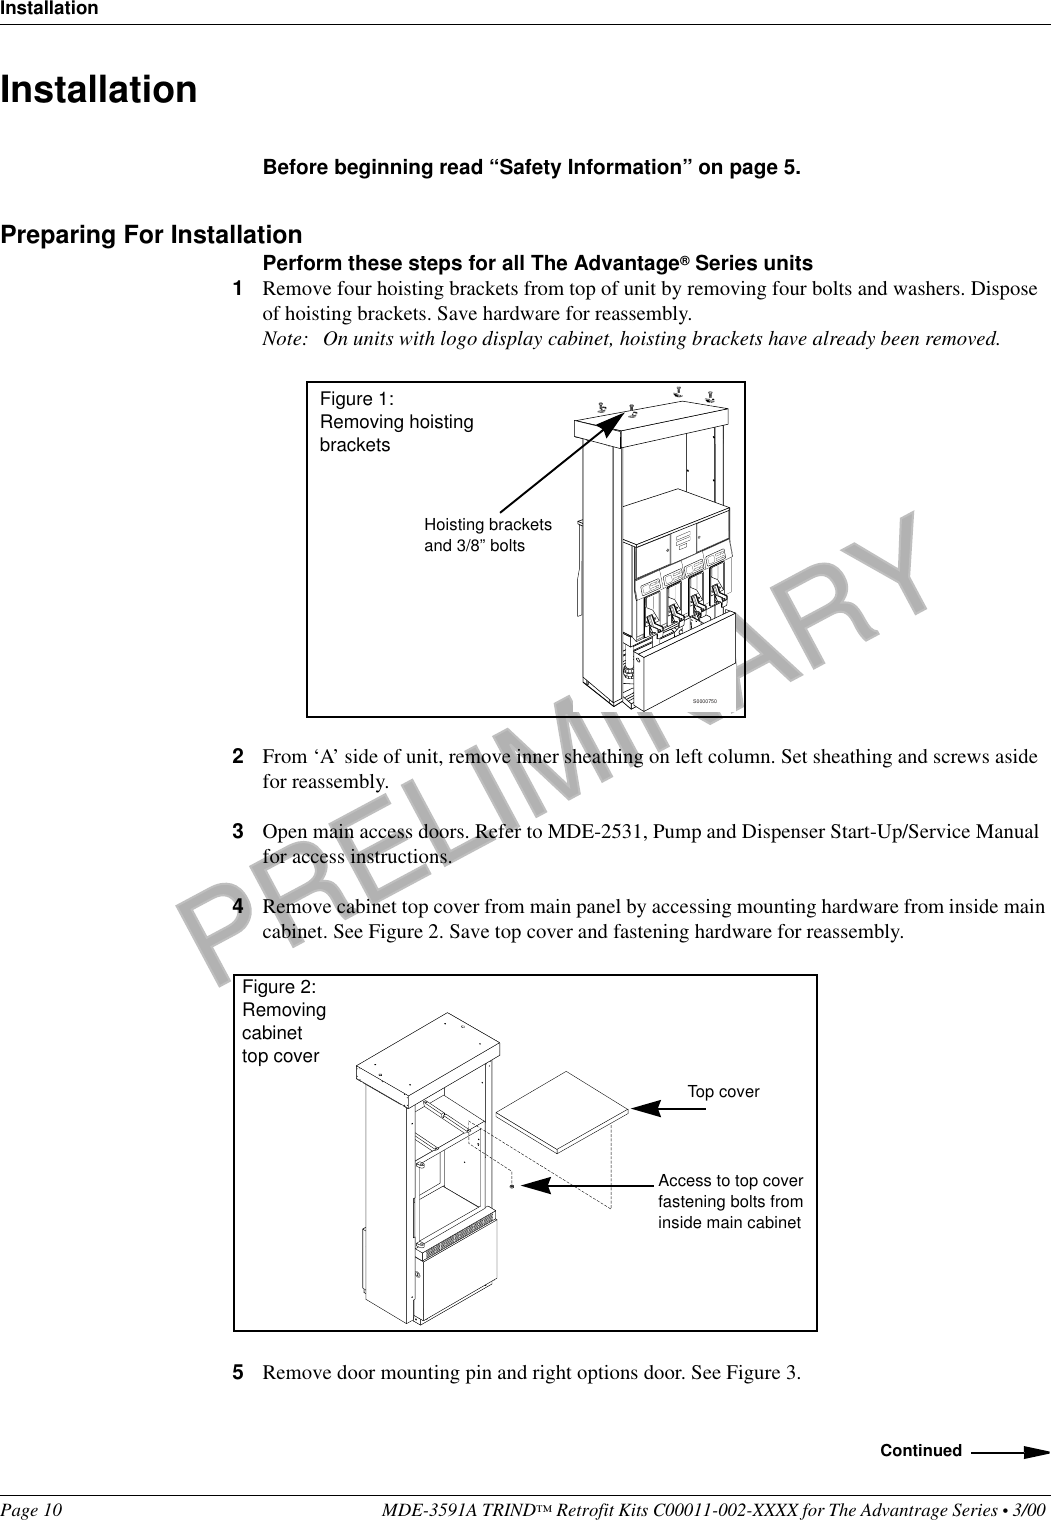 PRELIMINARYInstallationPage 10 MDE-3591A TRIND™ Retrofit Kits C00011-002-XXXX for The Advantrage Series • 3/00 Installation  Before beginning read “Safety Information” on page 5.Preparing For InstallationPerform these steps for all The Advantage® Series units1Remove four hoisting brackets from top of unit by removing four bolts and washers. Dispose of hoisting brackets. Save hardware for reassembly. Note: On units with logo display cabinet, hoisting brackets have already been removed. 2From ‘A’ side of unit, remove inner sheathing on left column. Set sheathing and screws aside for reassembly.3Open main access doors. Refer to MDE-2531, Pump and Dispenser Start-Up/Service Manual for access instructions.4Remove cabinet top cover from main panel by accessing mounting hardware from inside main cabinet. See Figure 2. Save top cover and fastening hardware for reassembly.5Remove door mounting pin and right options door. See Figure 3.S0000750Hoisting bracketsand 3/8” boltsFigure 1: Removing hoisting bracketsTop coverAccess to top coverfastening bolts from inside main cabinetFigure 2: Removing cabinet top coverContinued